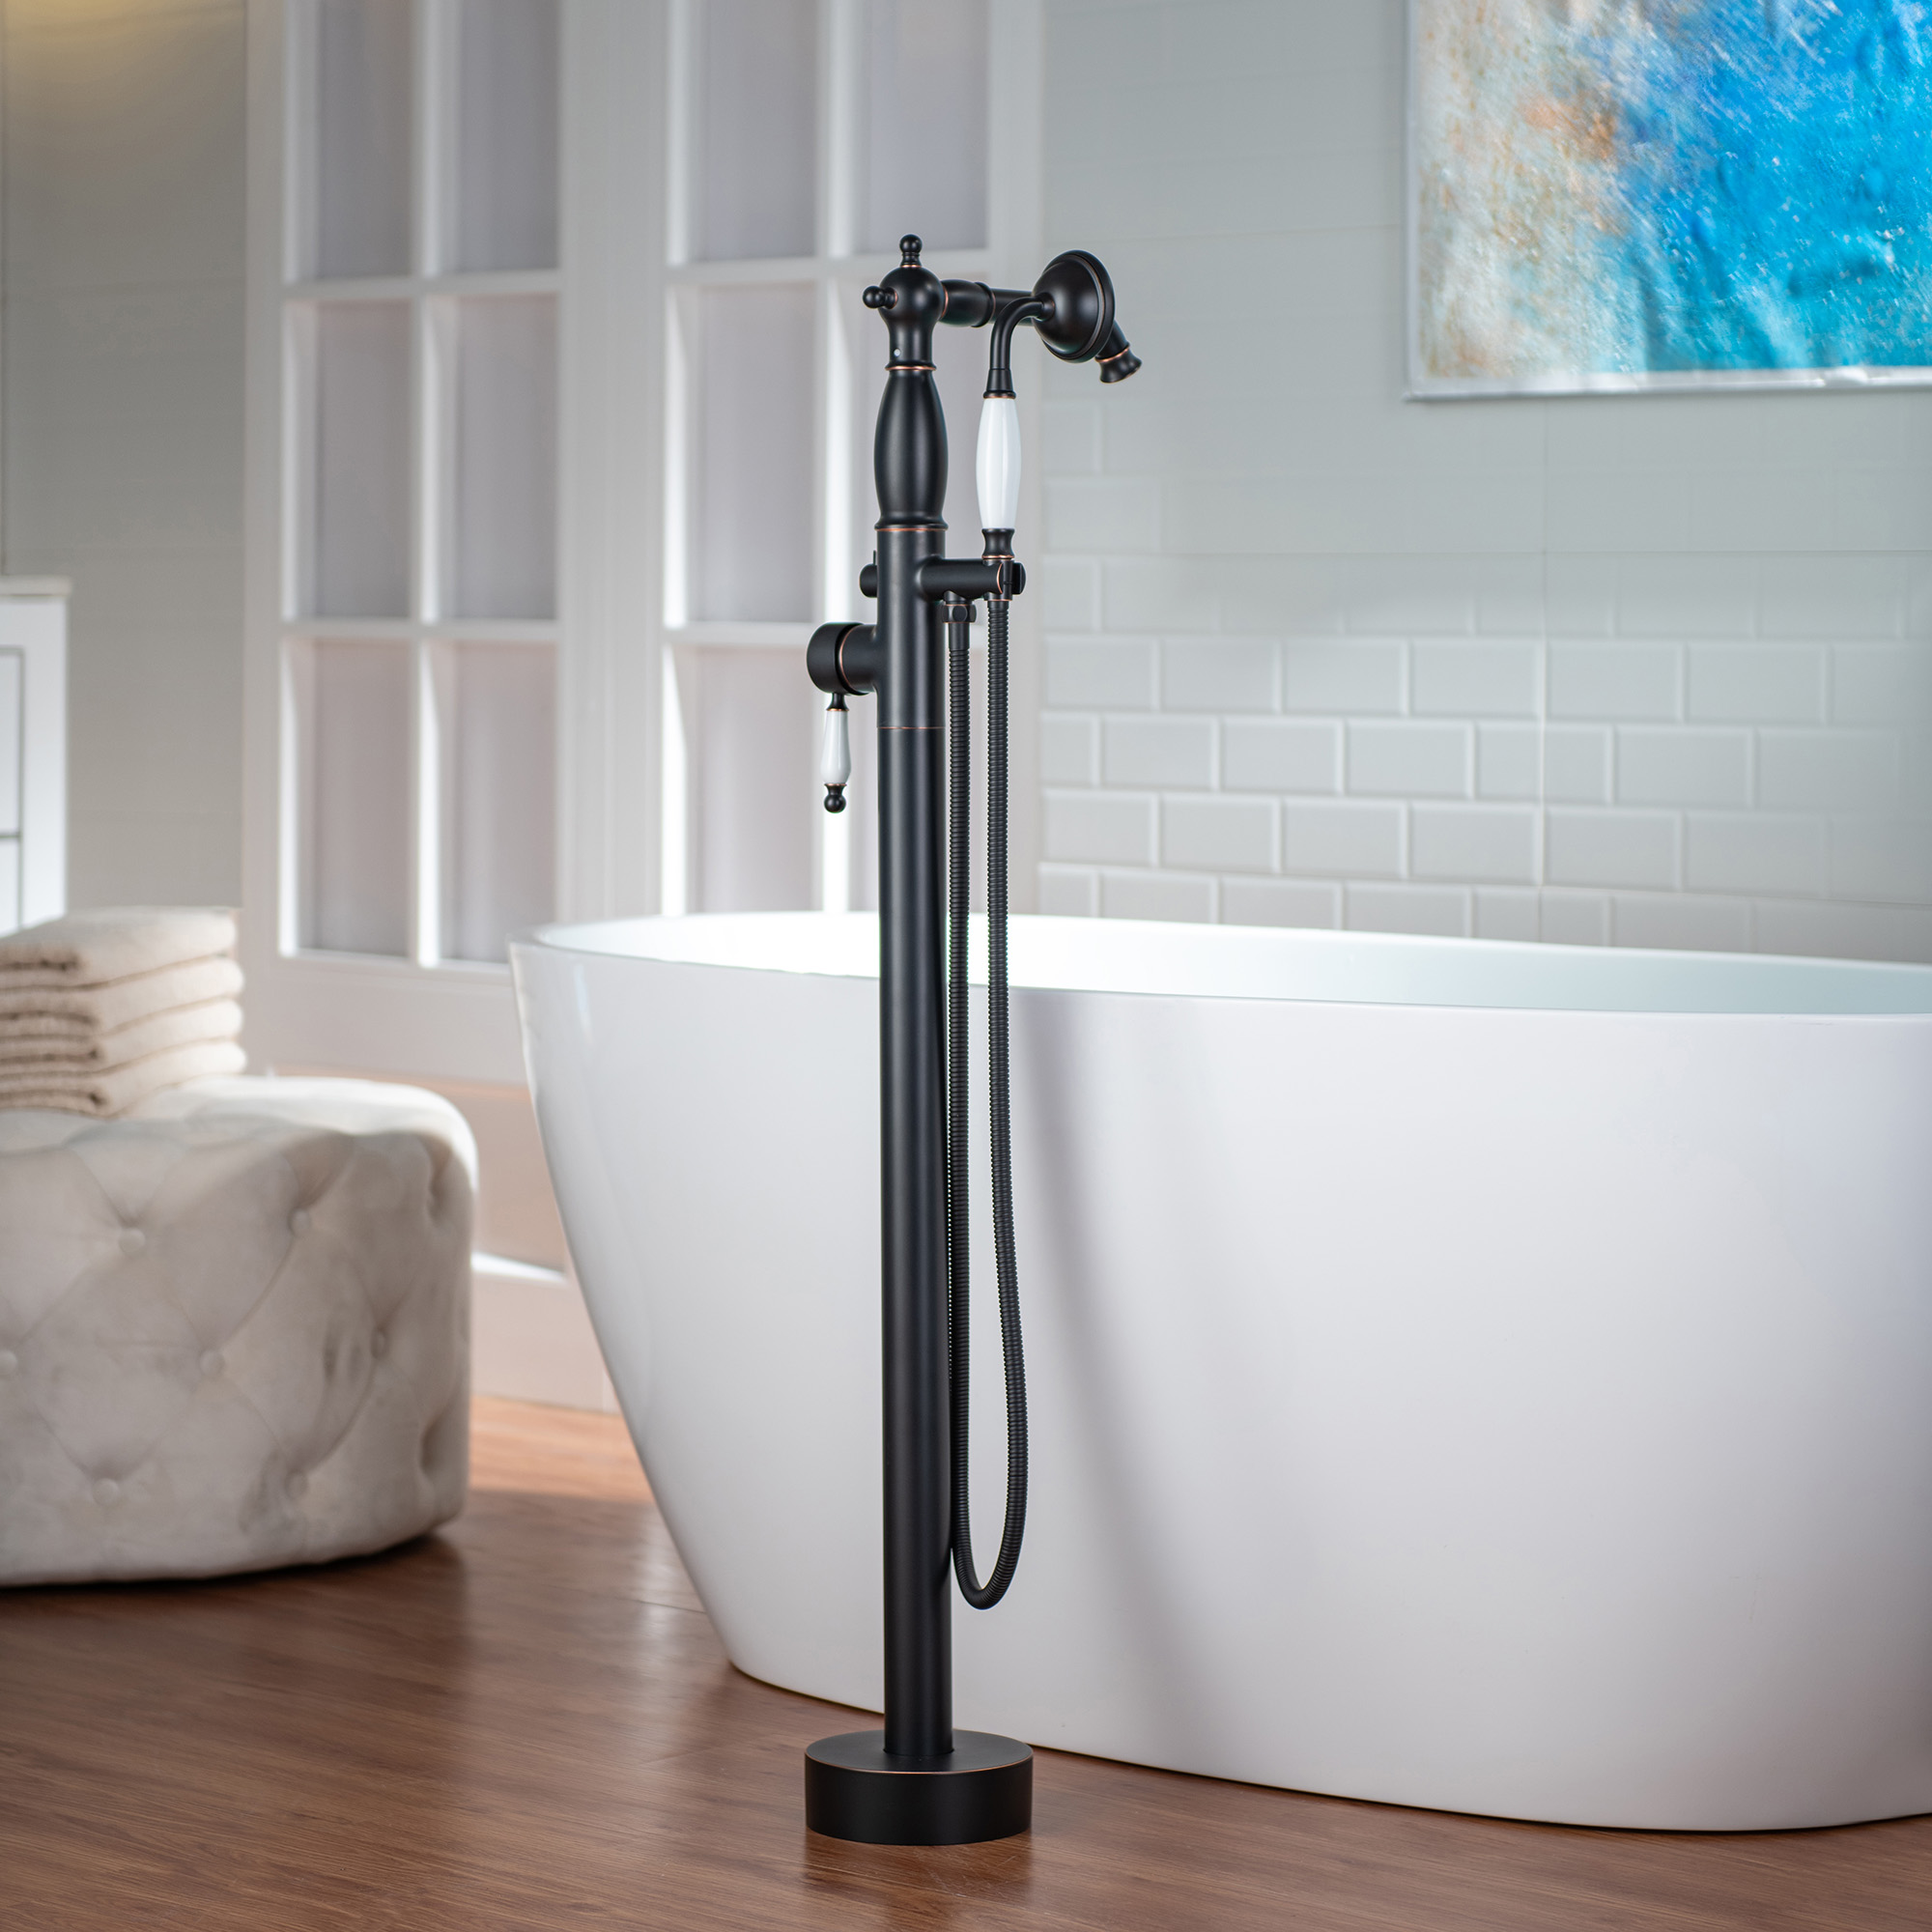  WOODBRIDGE F0049ORB Fusion Single Handle Floor Mount Freestanding Tub Filler Faucet with Telephone Hand shower in Oil Rubbed Bronze Finish_12281